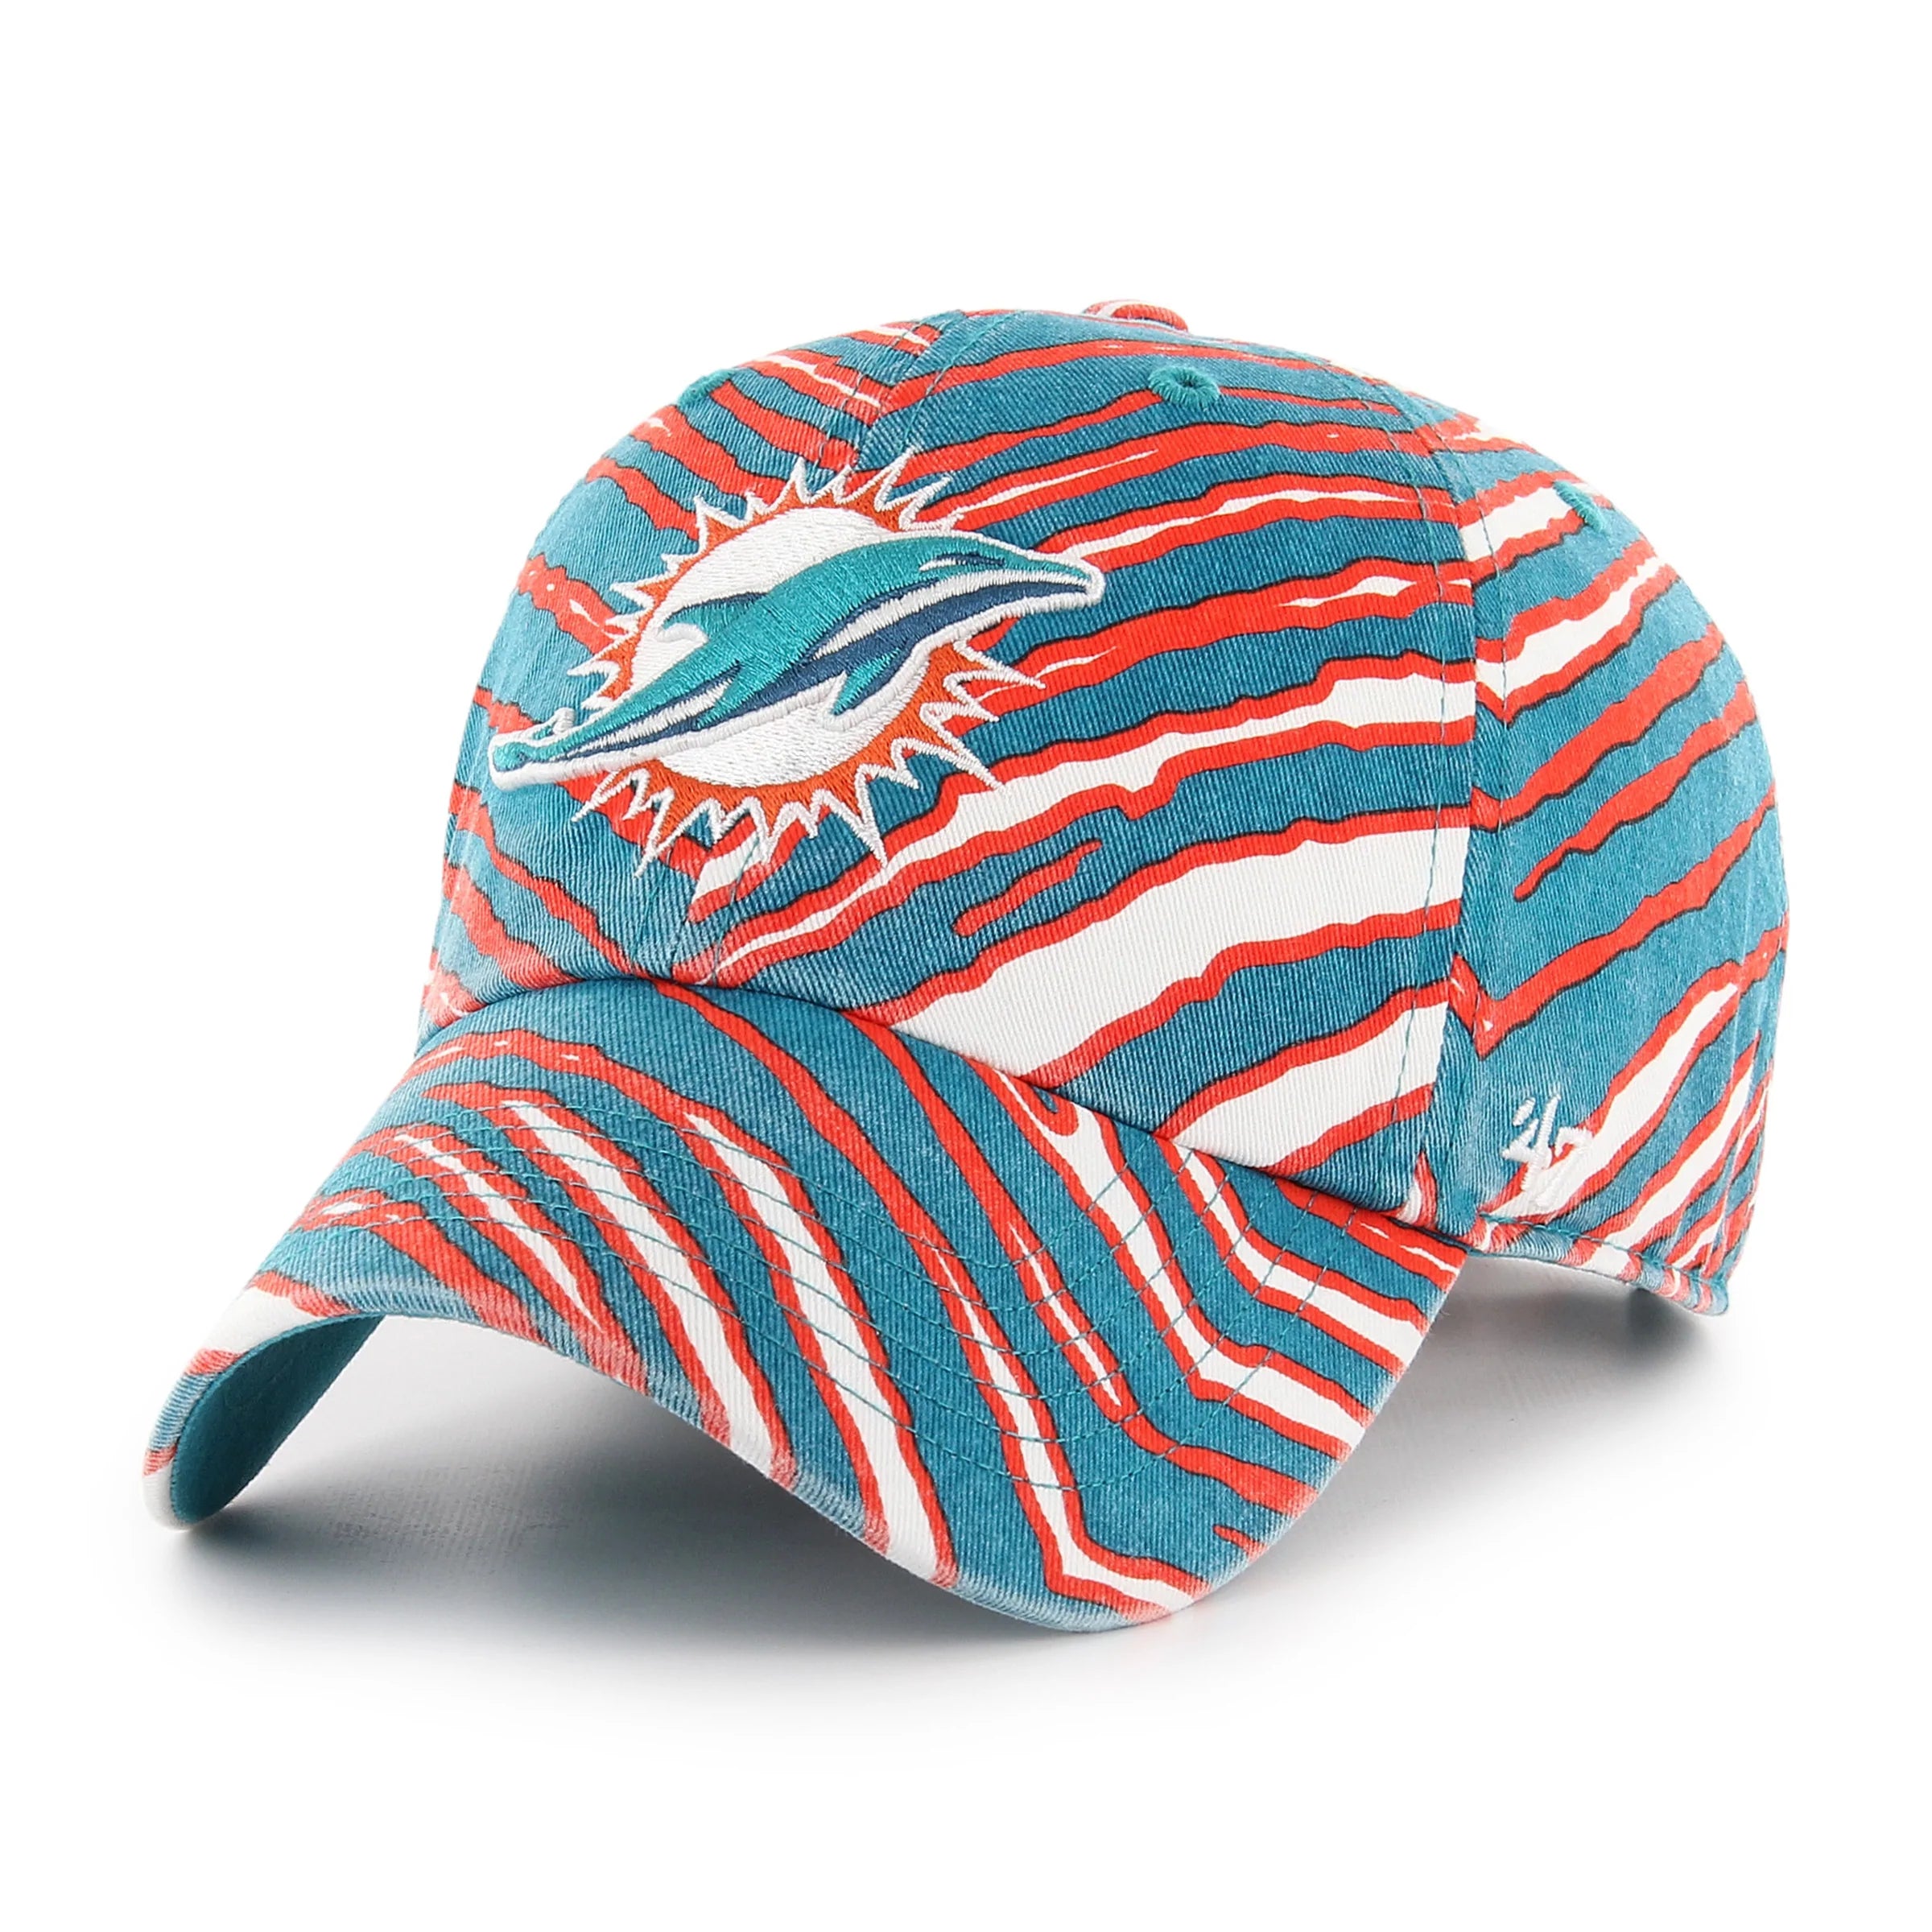 Girls Youth '47 White Miami Dolphins Adore Clean Up Adjustable Hat